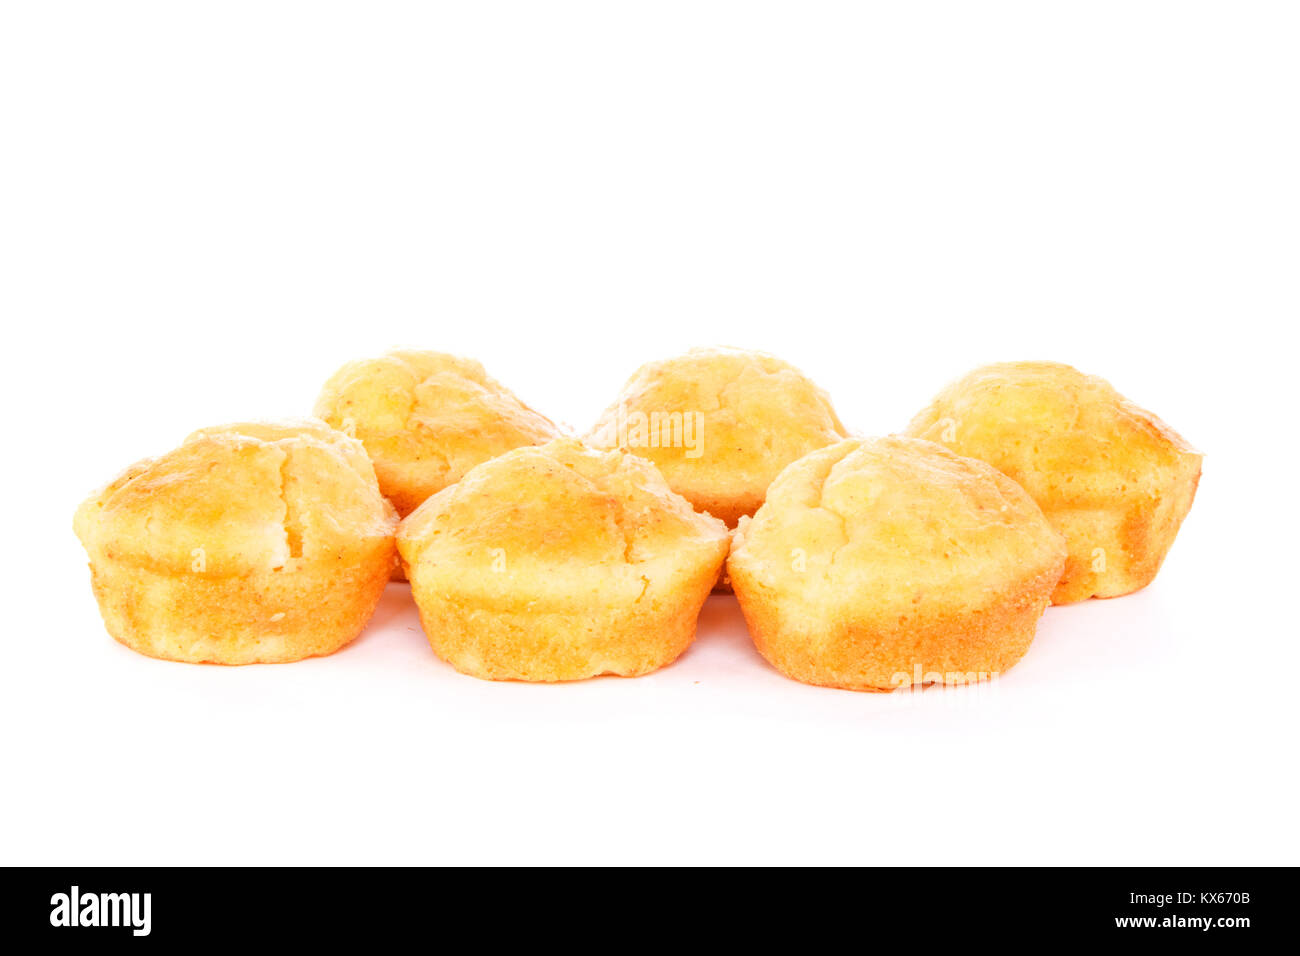 Old, rusty, cast-iron pan for baking cornbread sticks in the shape of corn  on the cob isolated against a white background Stock Photo - Alamy